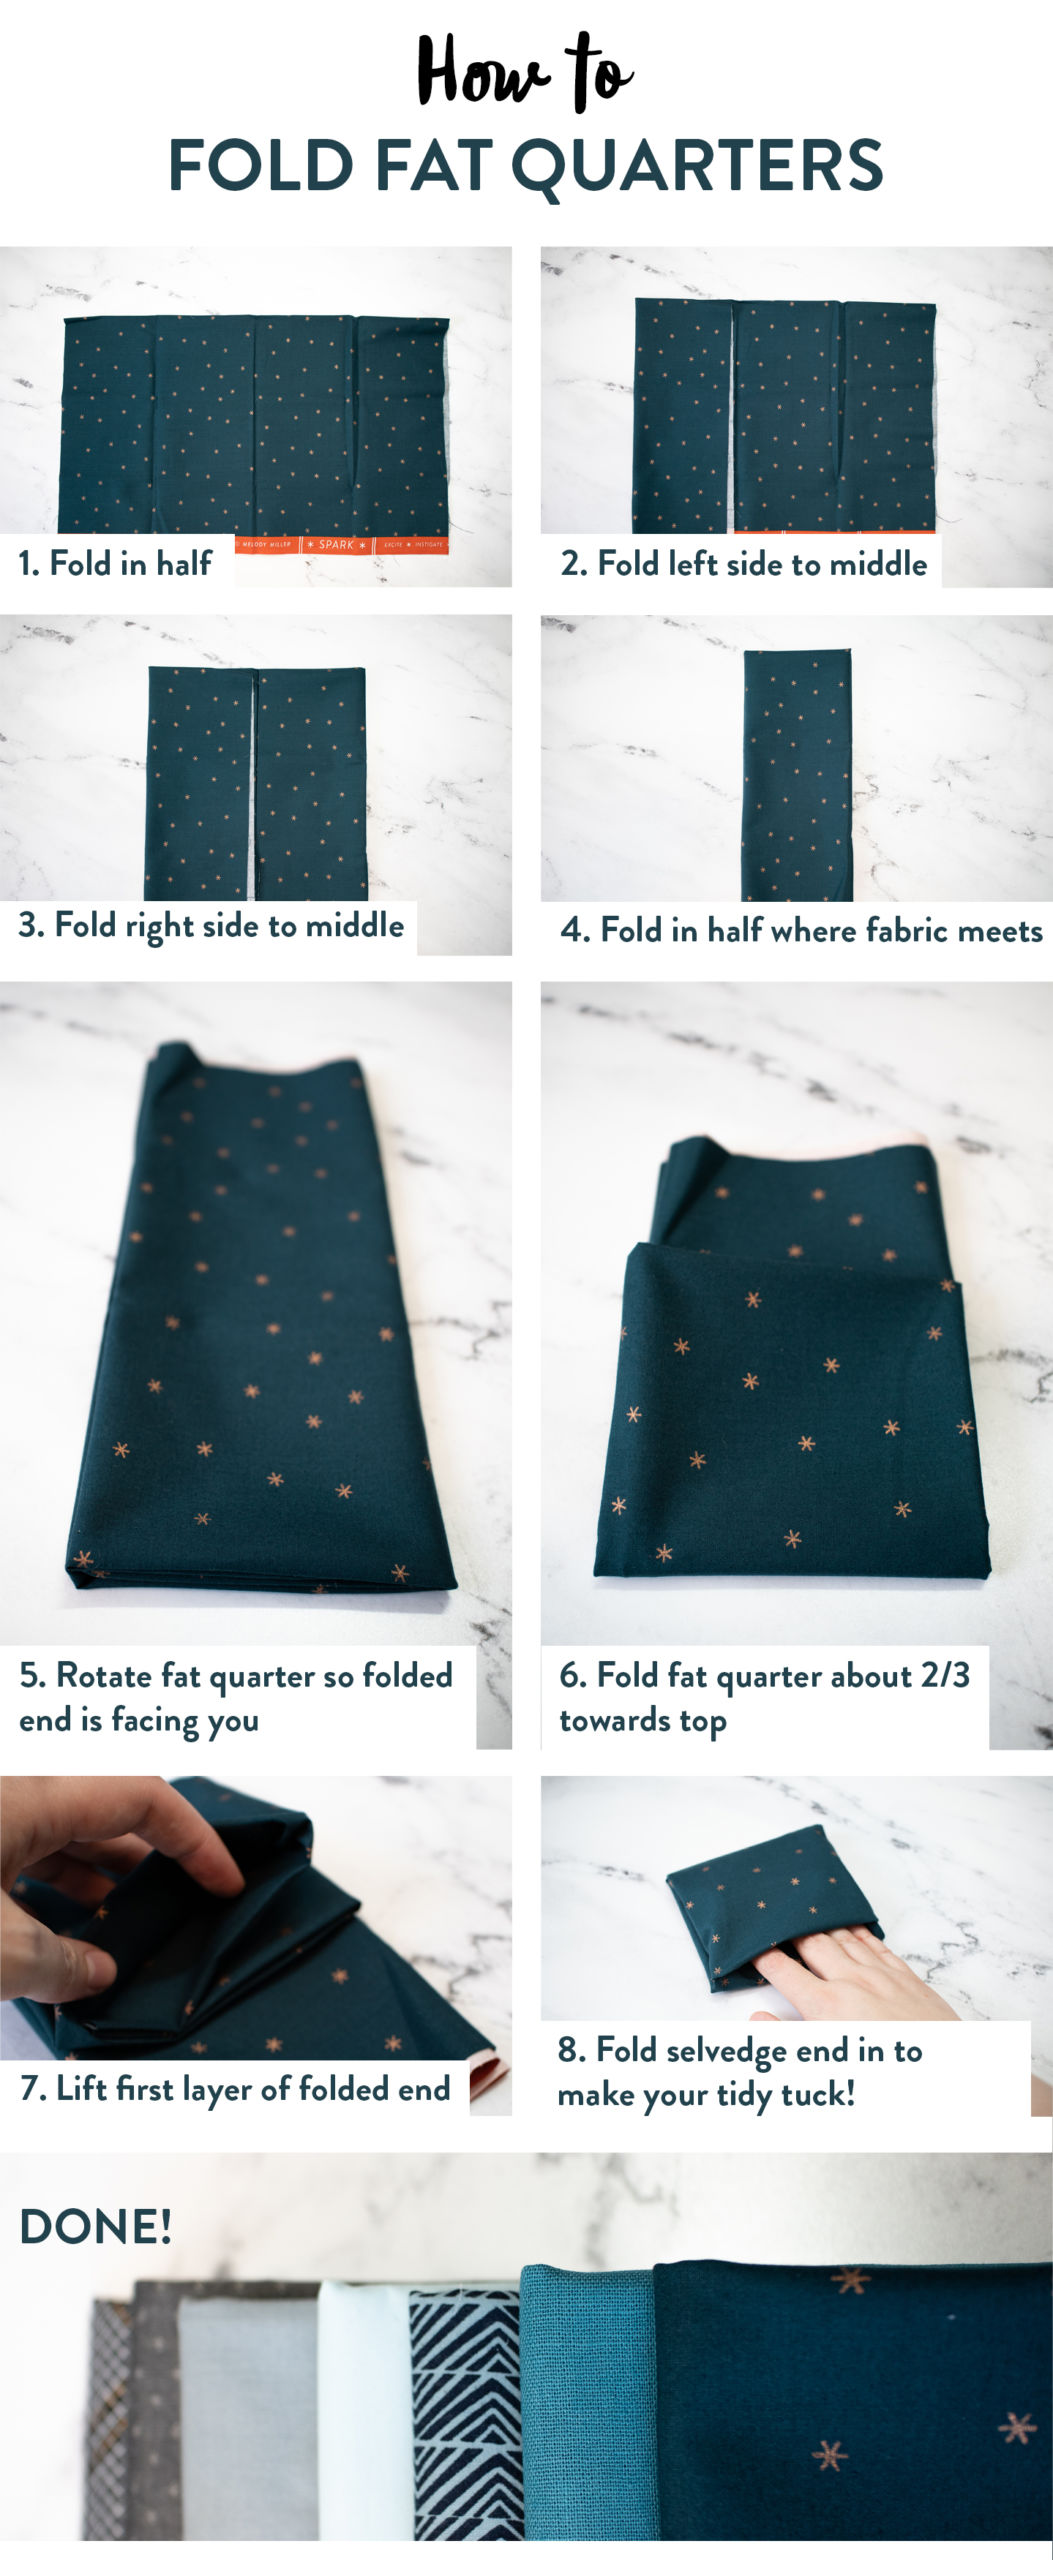 The ultimate guide to folding fabric of different sizes to neatly organize your fabric stash. Step by step photos and instructions show you how to fold fat quarters, half yards, and yardage so you can get started on cleaning your sewing studio.